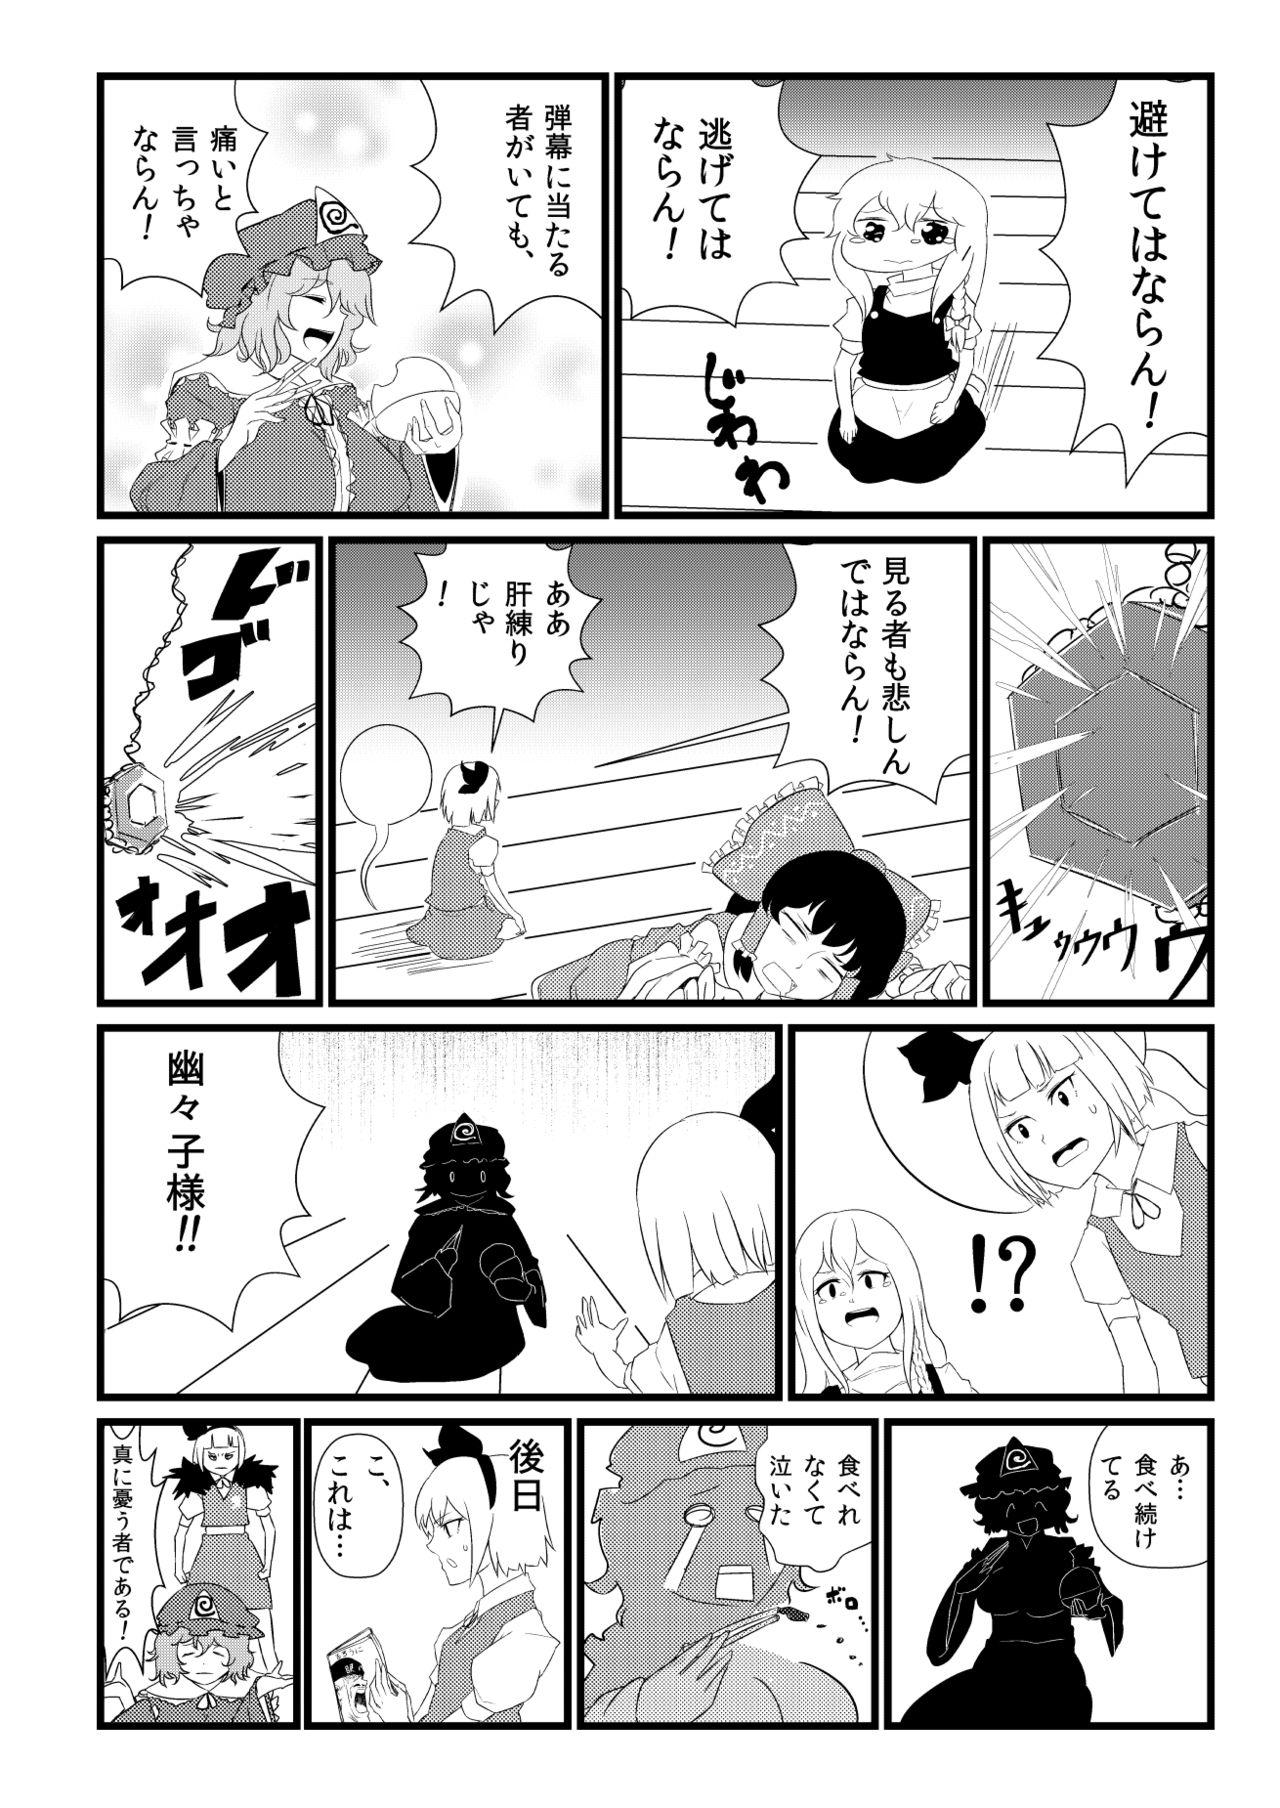 Boobs 東方板としあき合同誌5 - Touhou project Home - Page 4